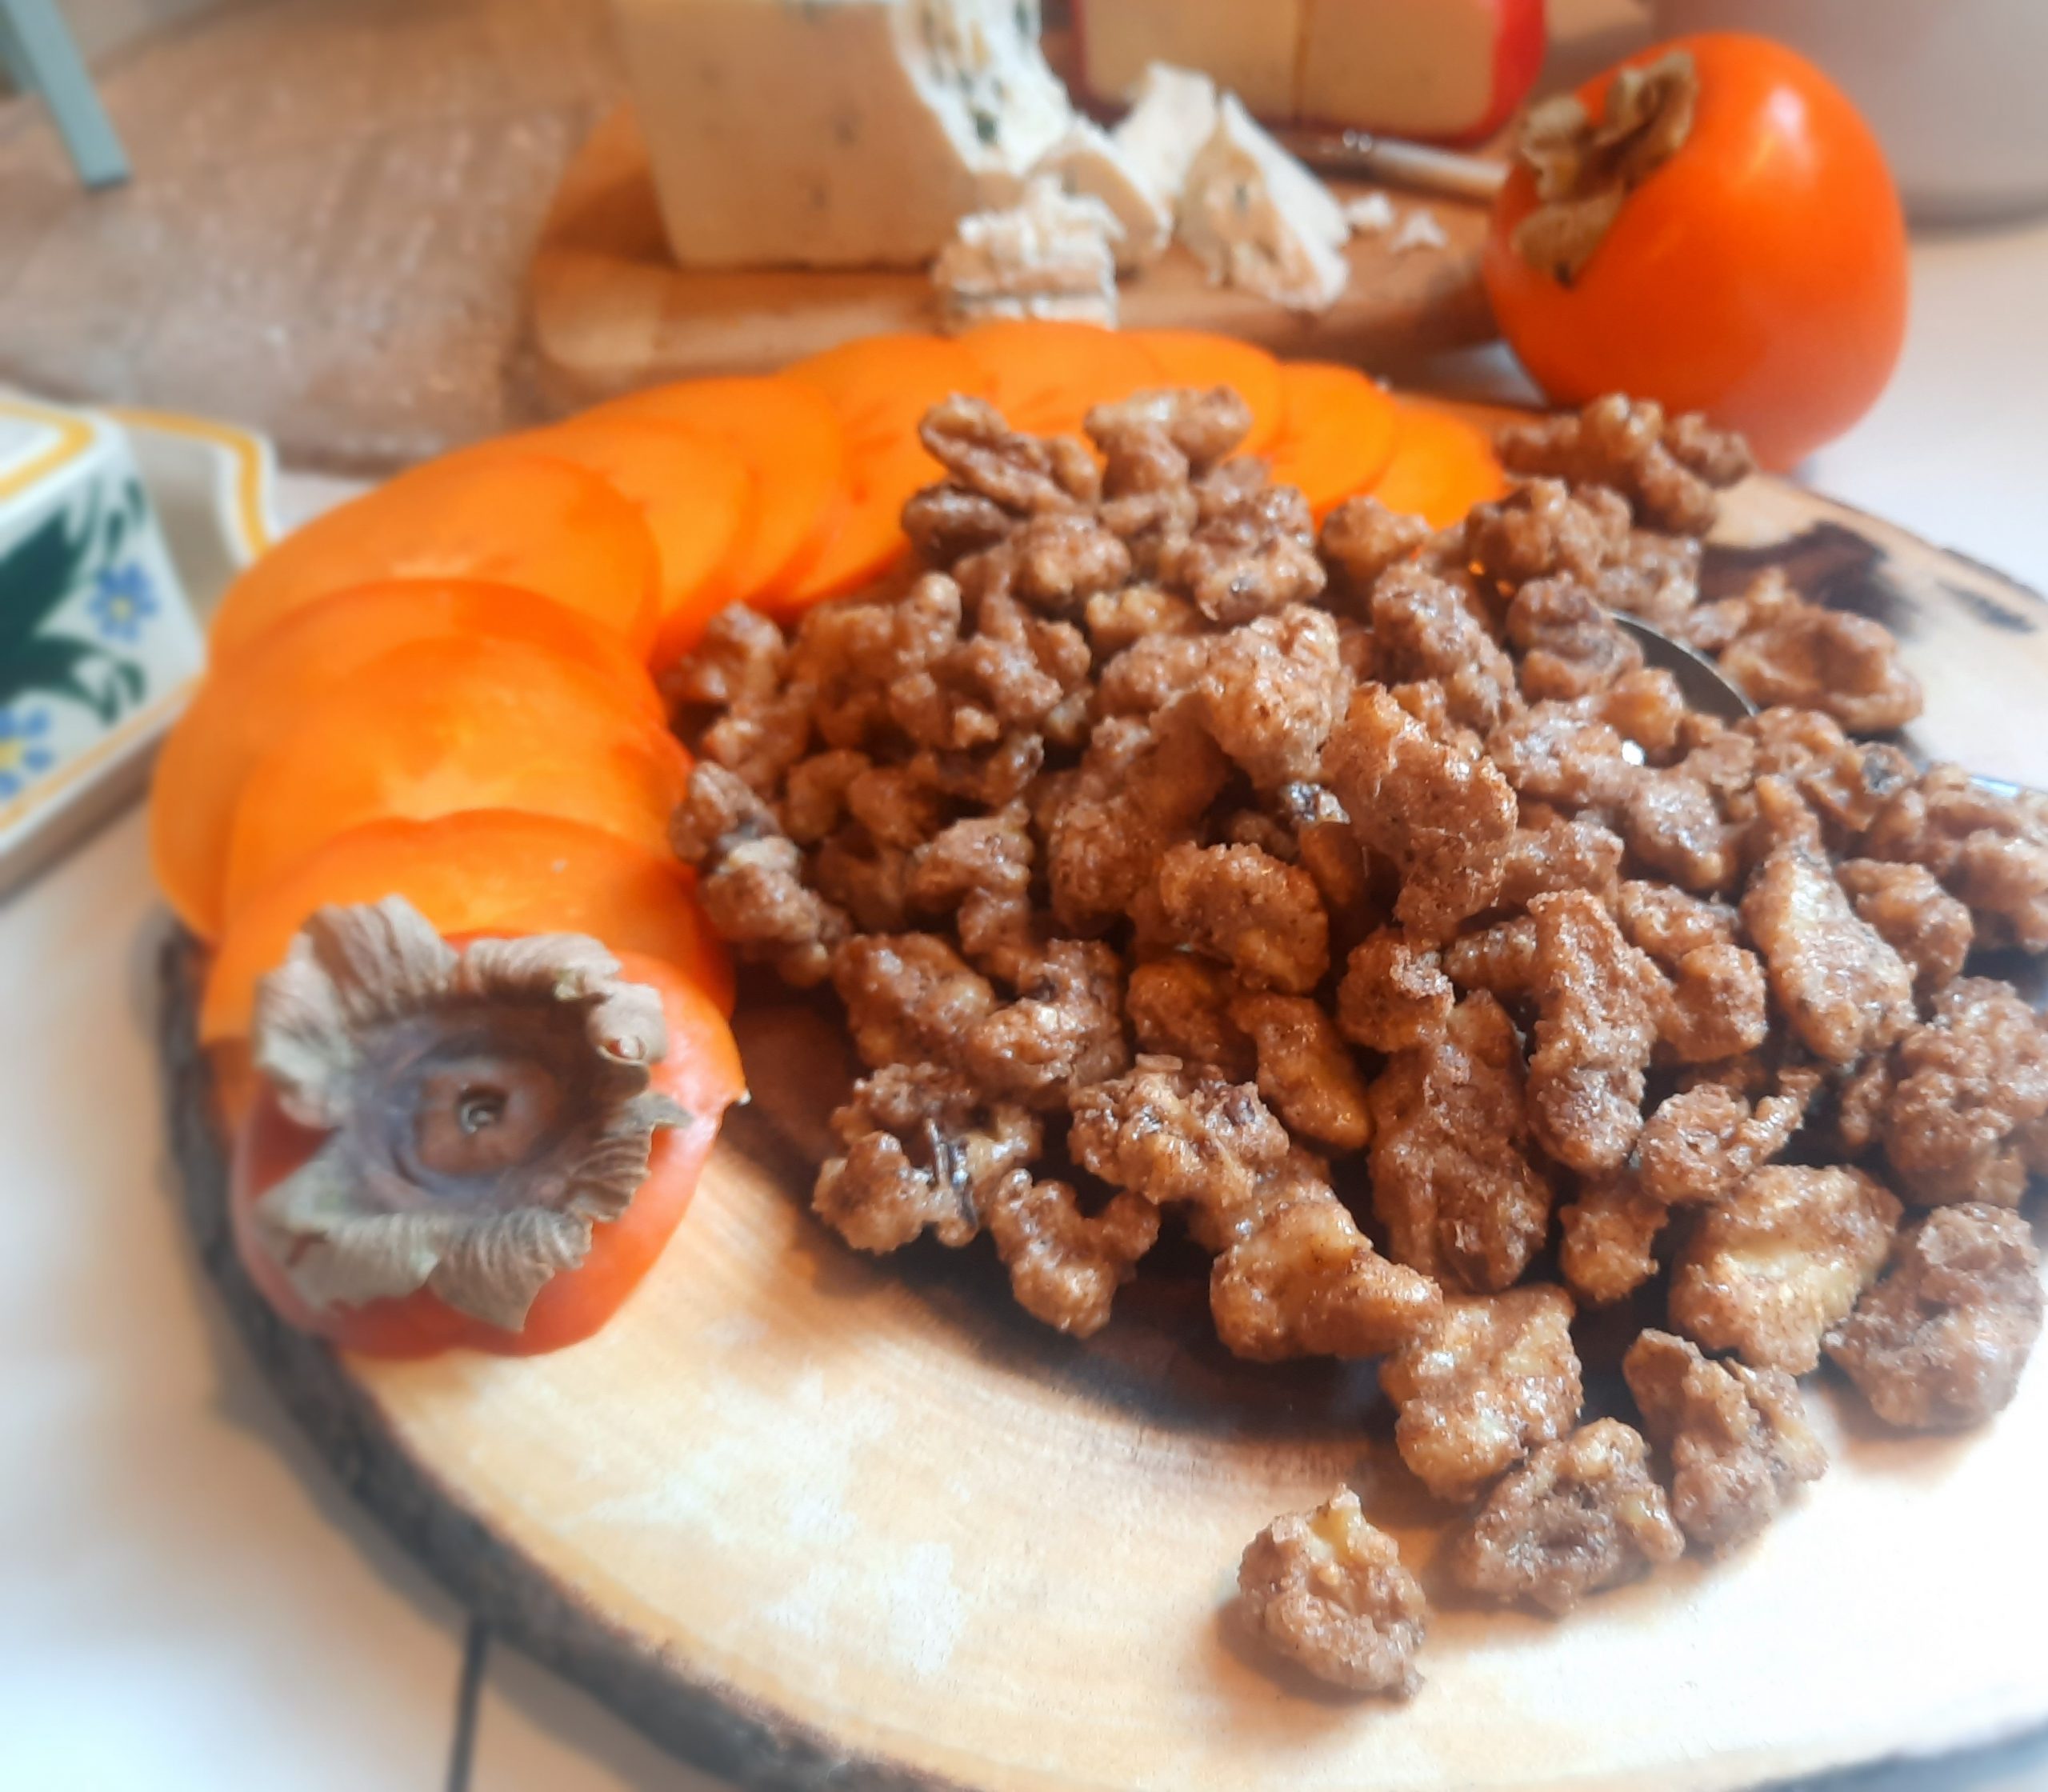 Candied walnuts recipe can have many different ingredients